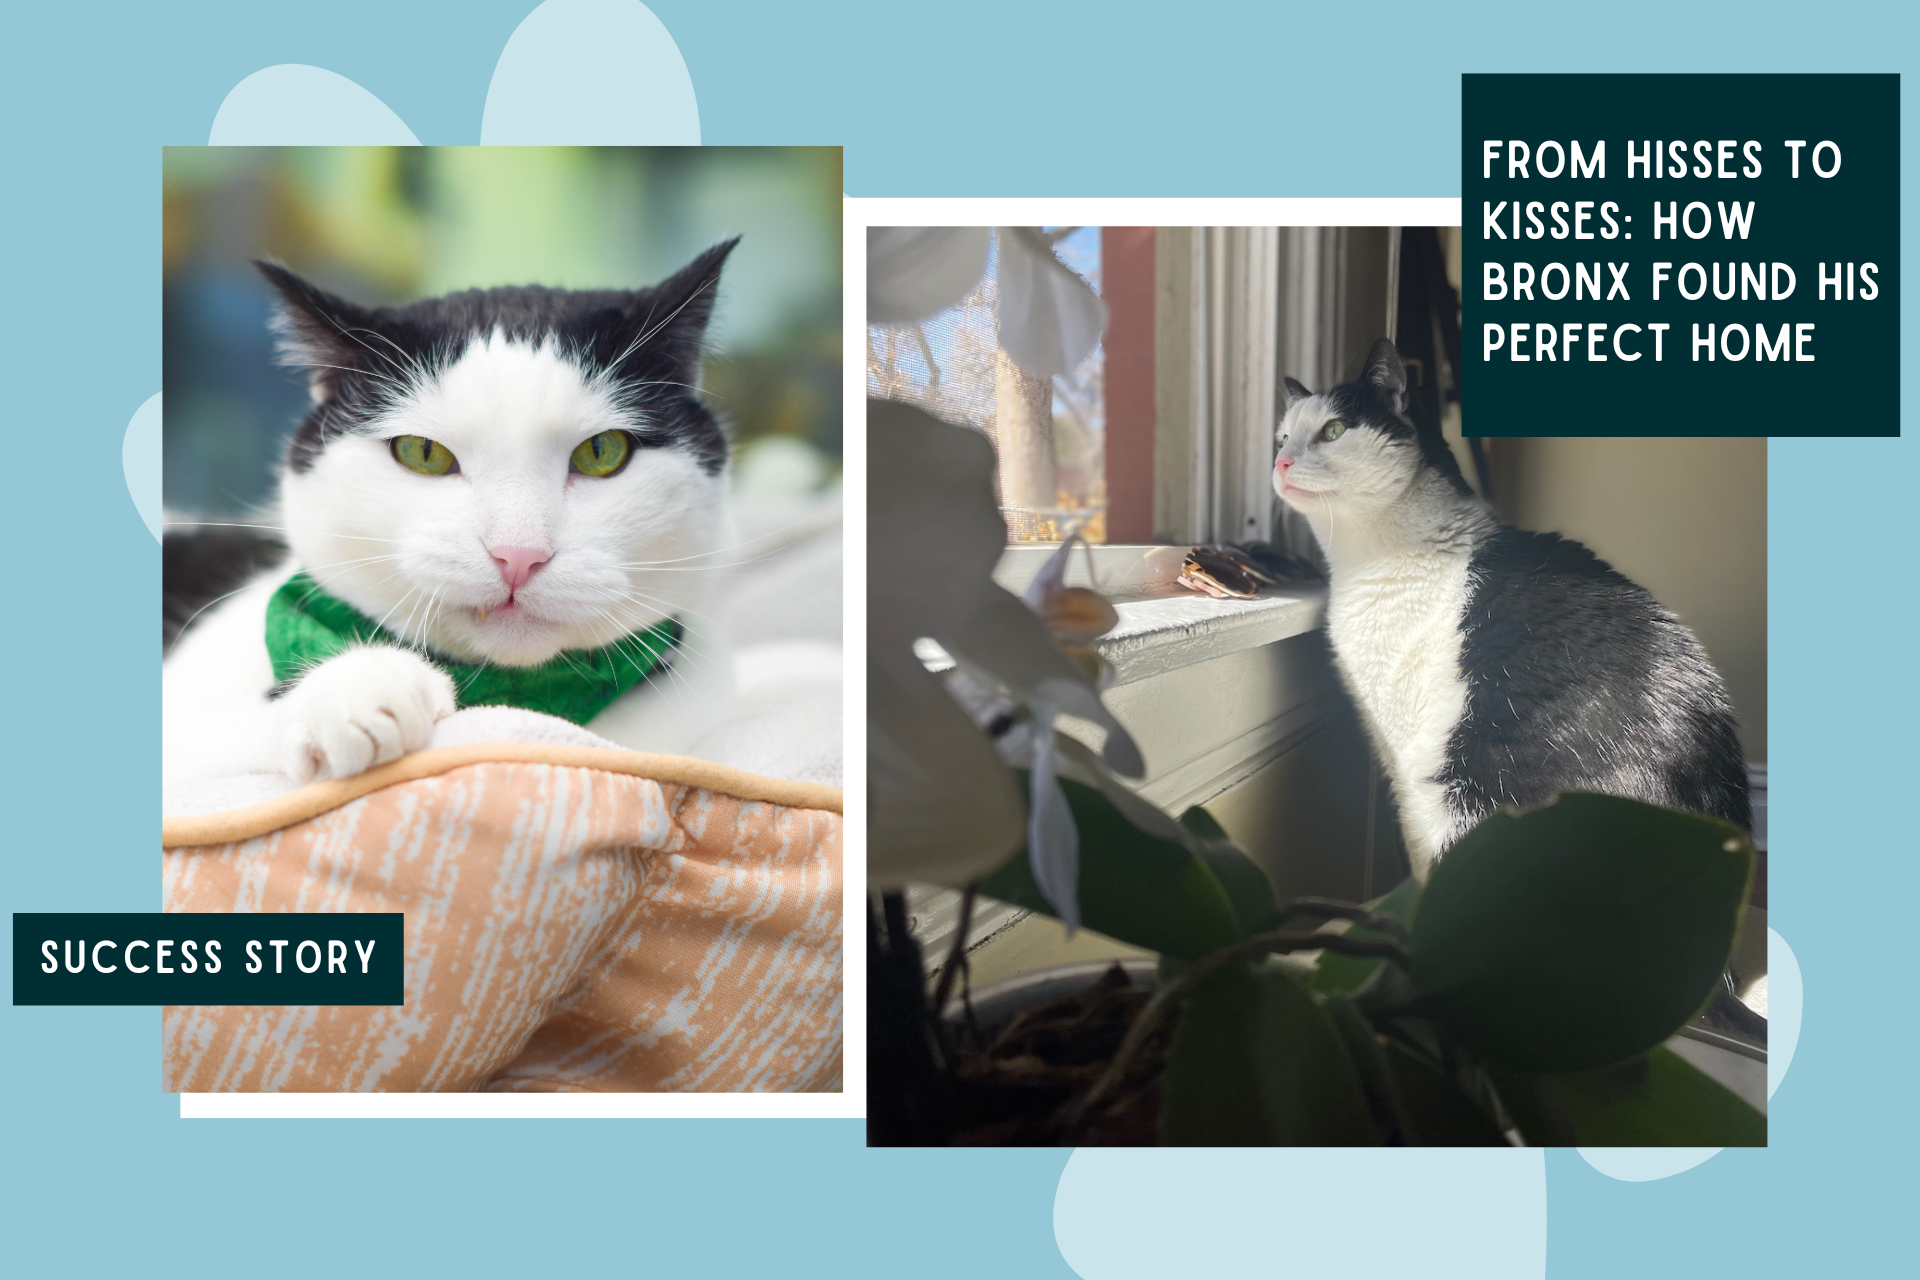 From Hisses to Kisses: How Bronx Found His Perfect Home